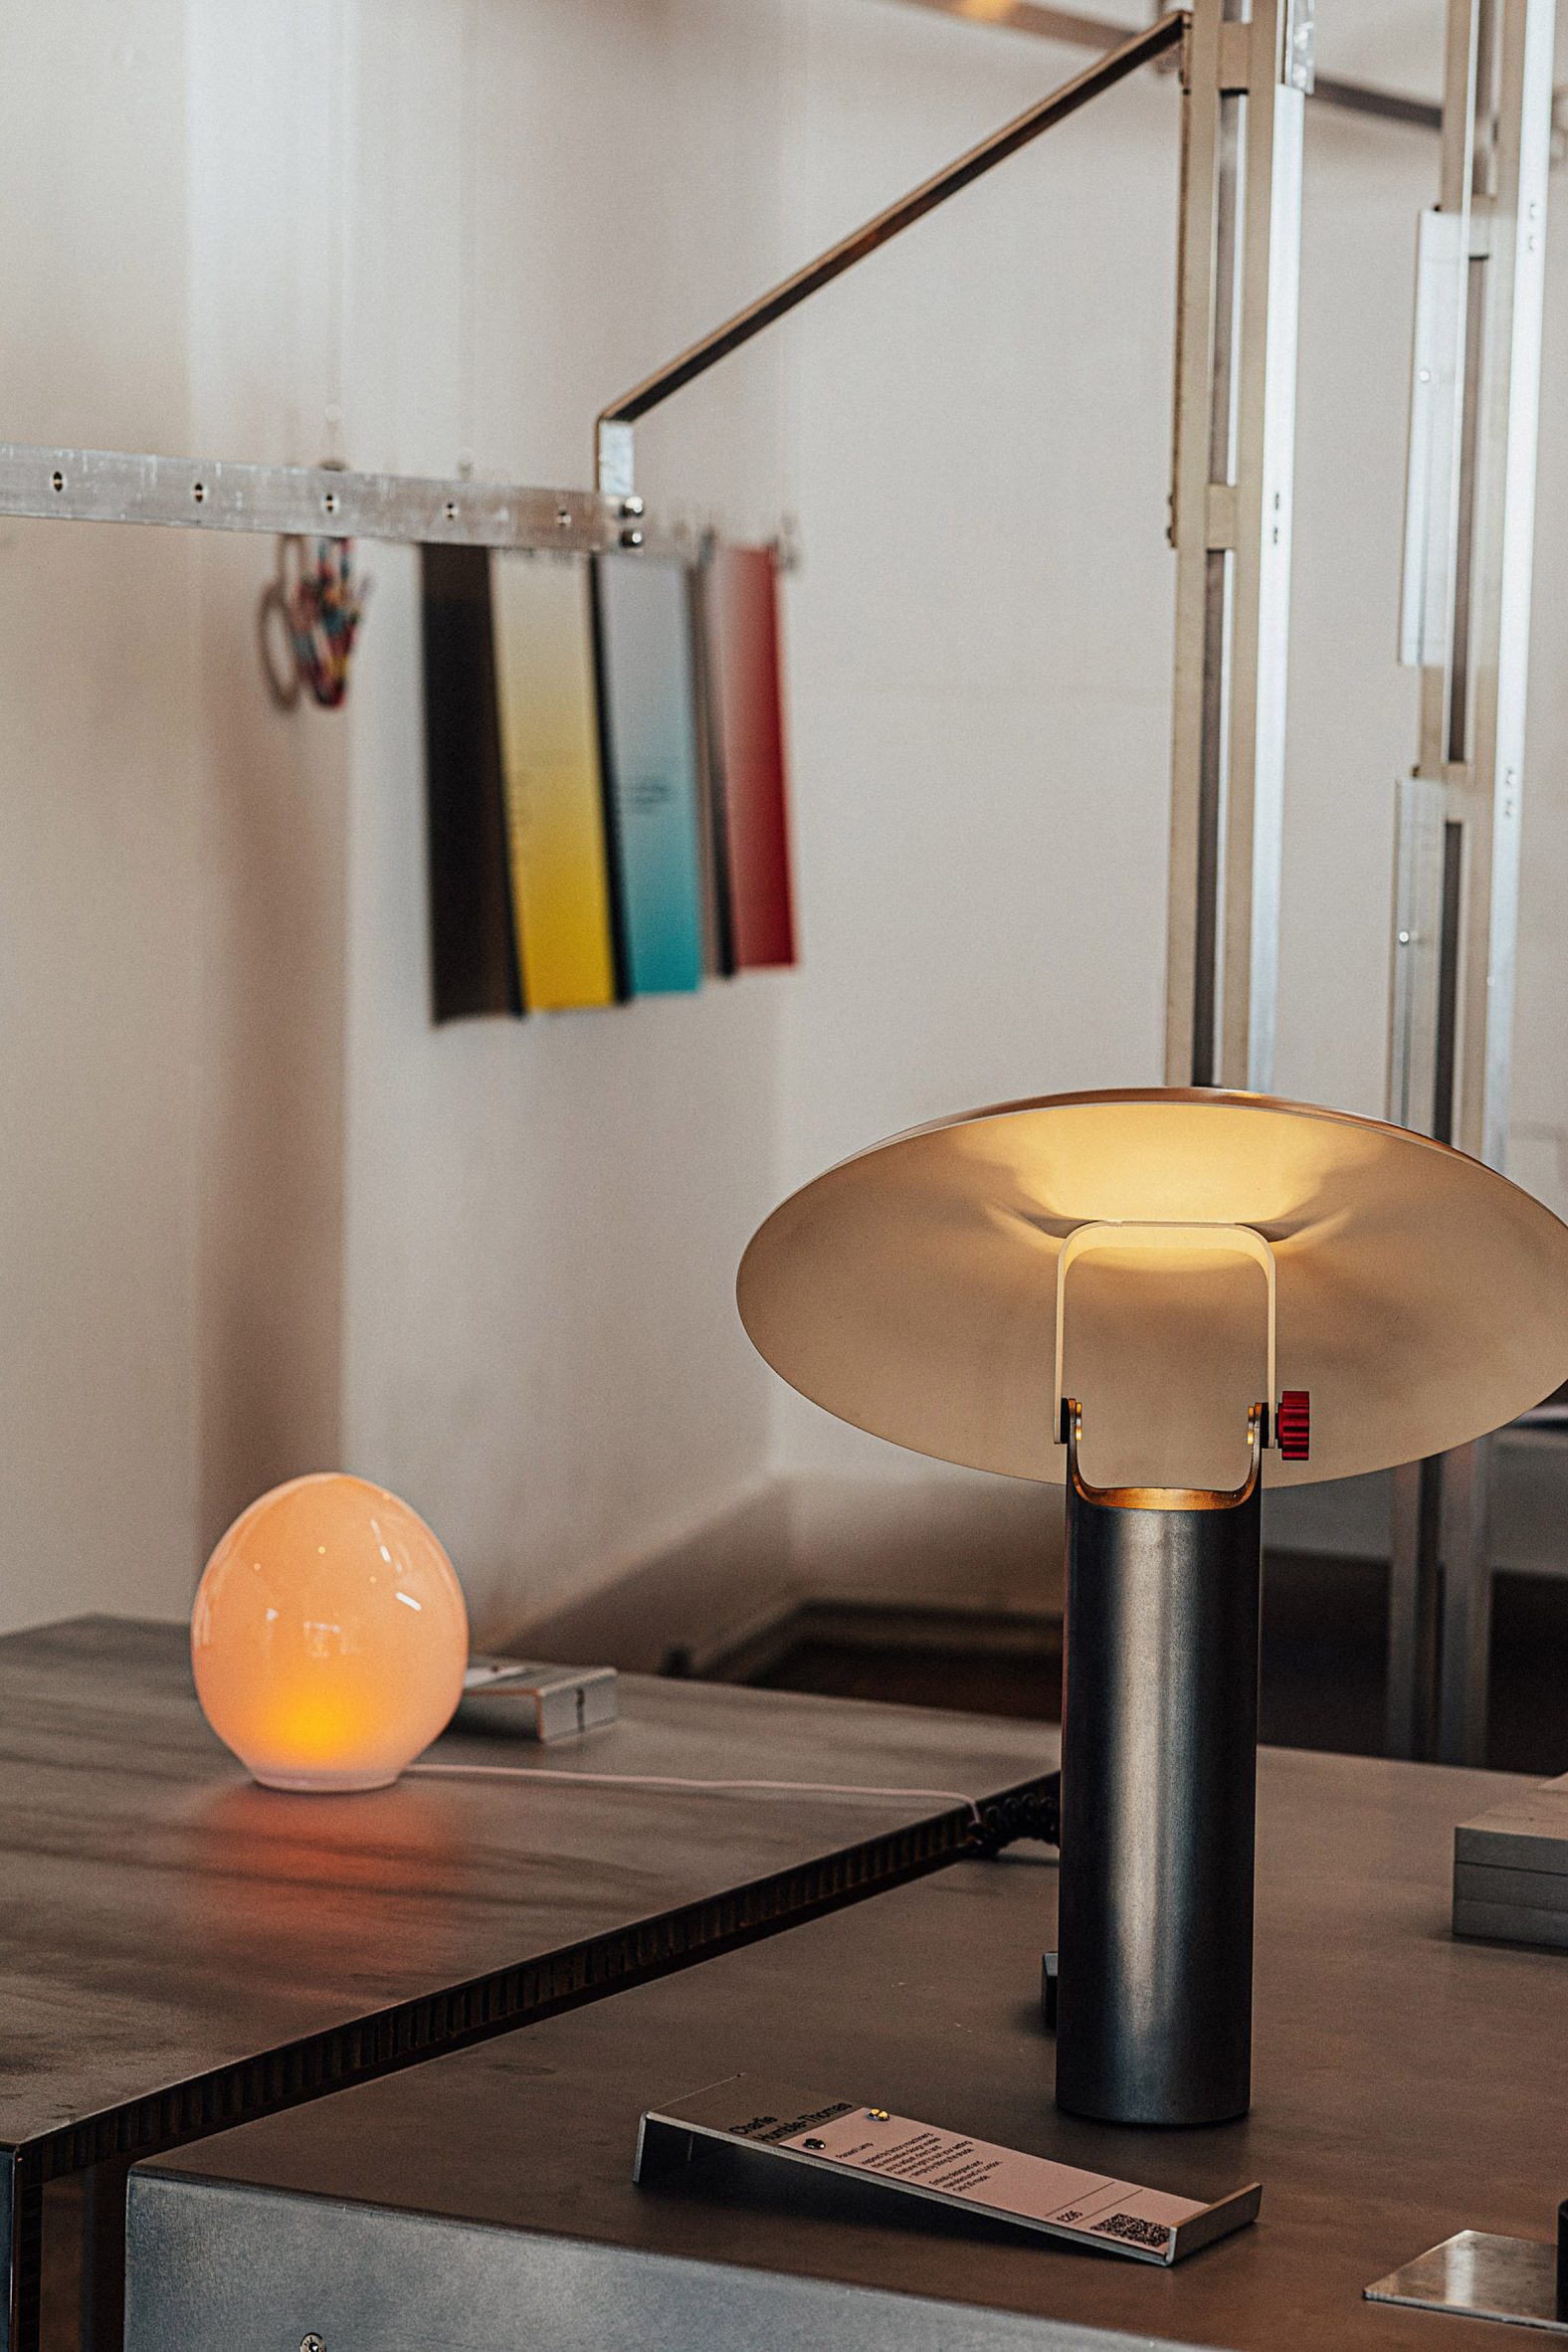 A metal lamp next to a small egg-shaped lamp